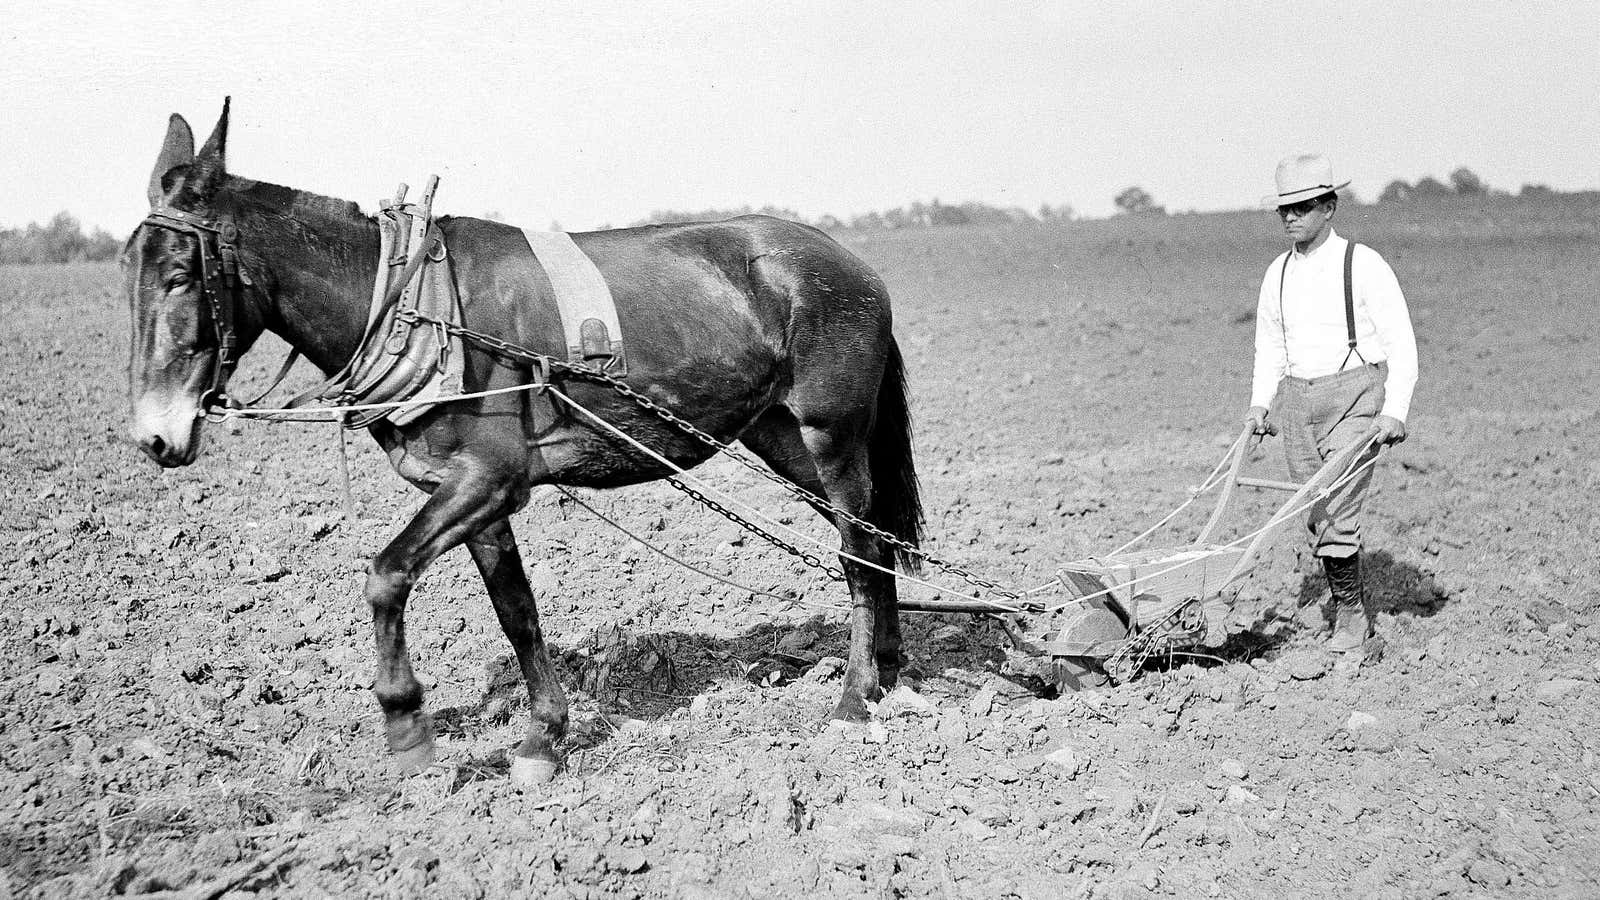 In countries with a history of plough-based farming, there a fewer girls, a recent study finds.